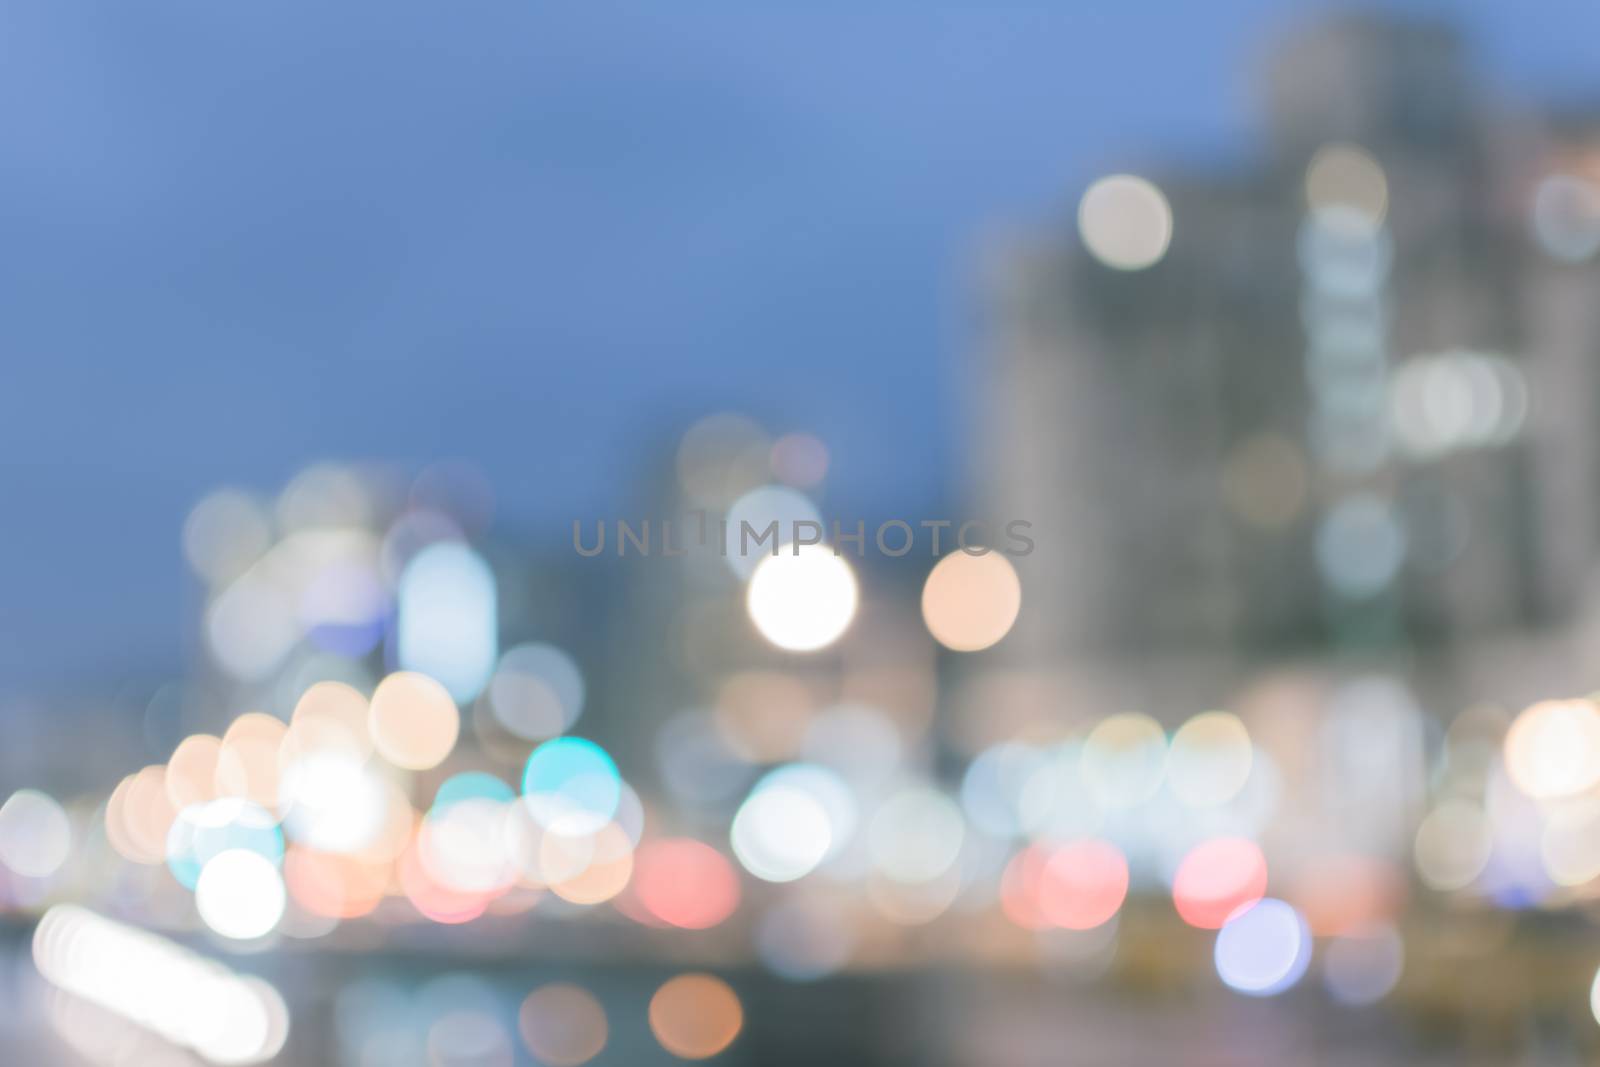 Abstract urban background with blurred buildings and street, shallow depth of focus.